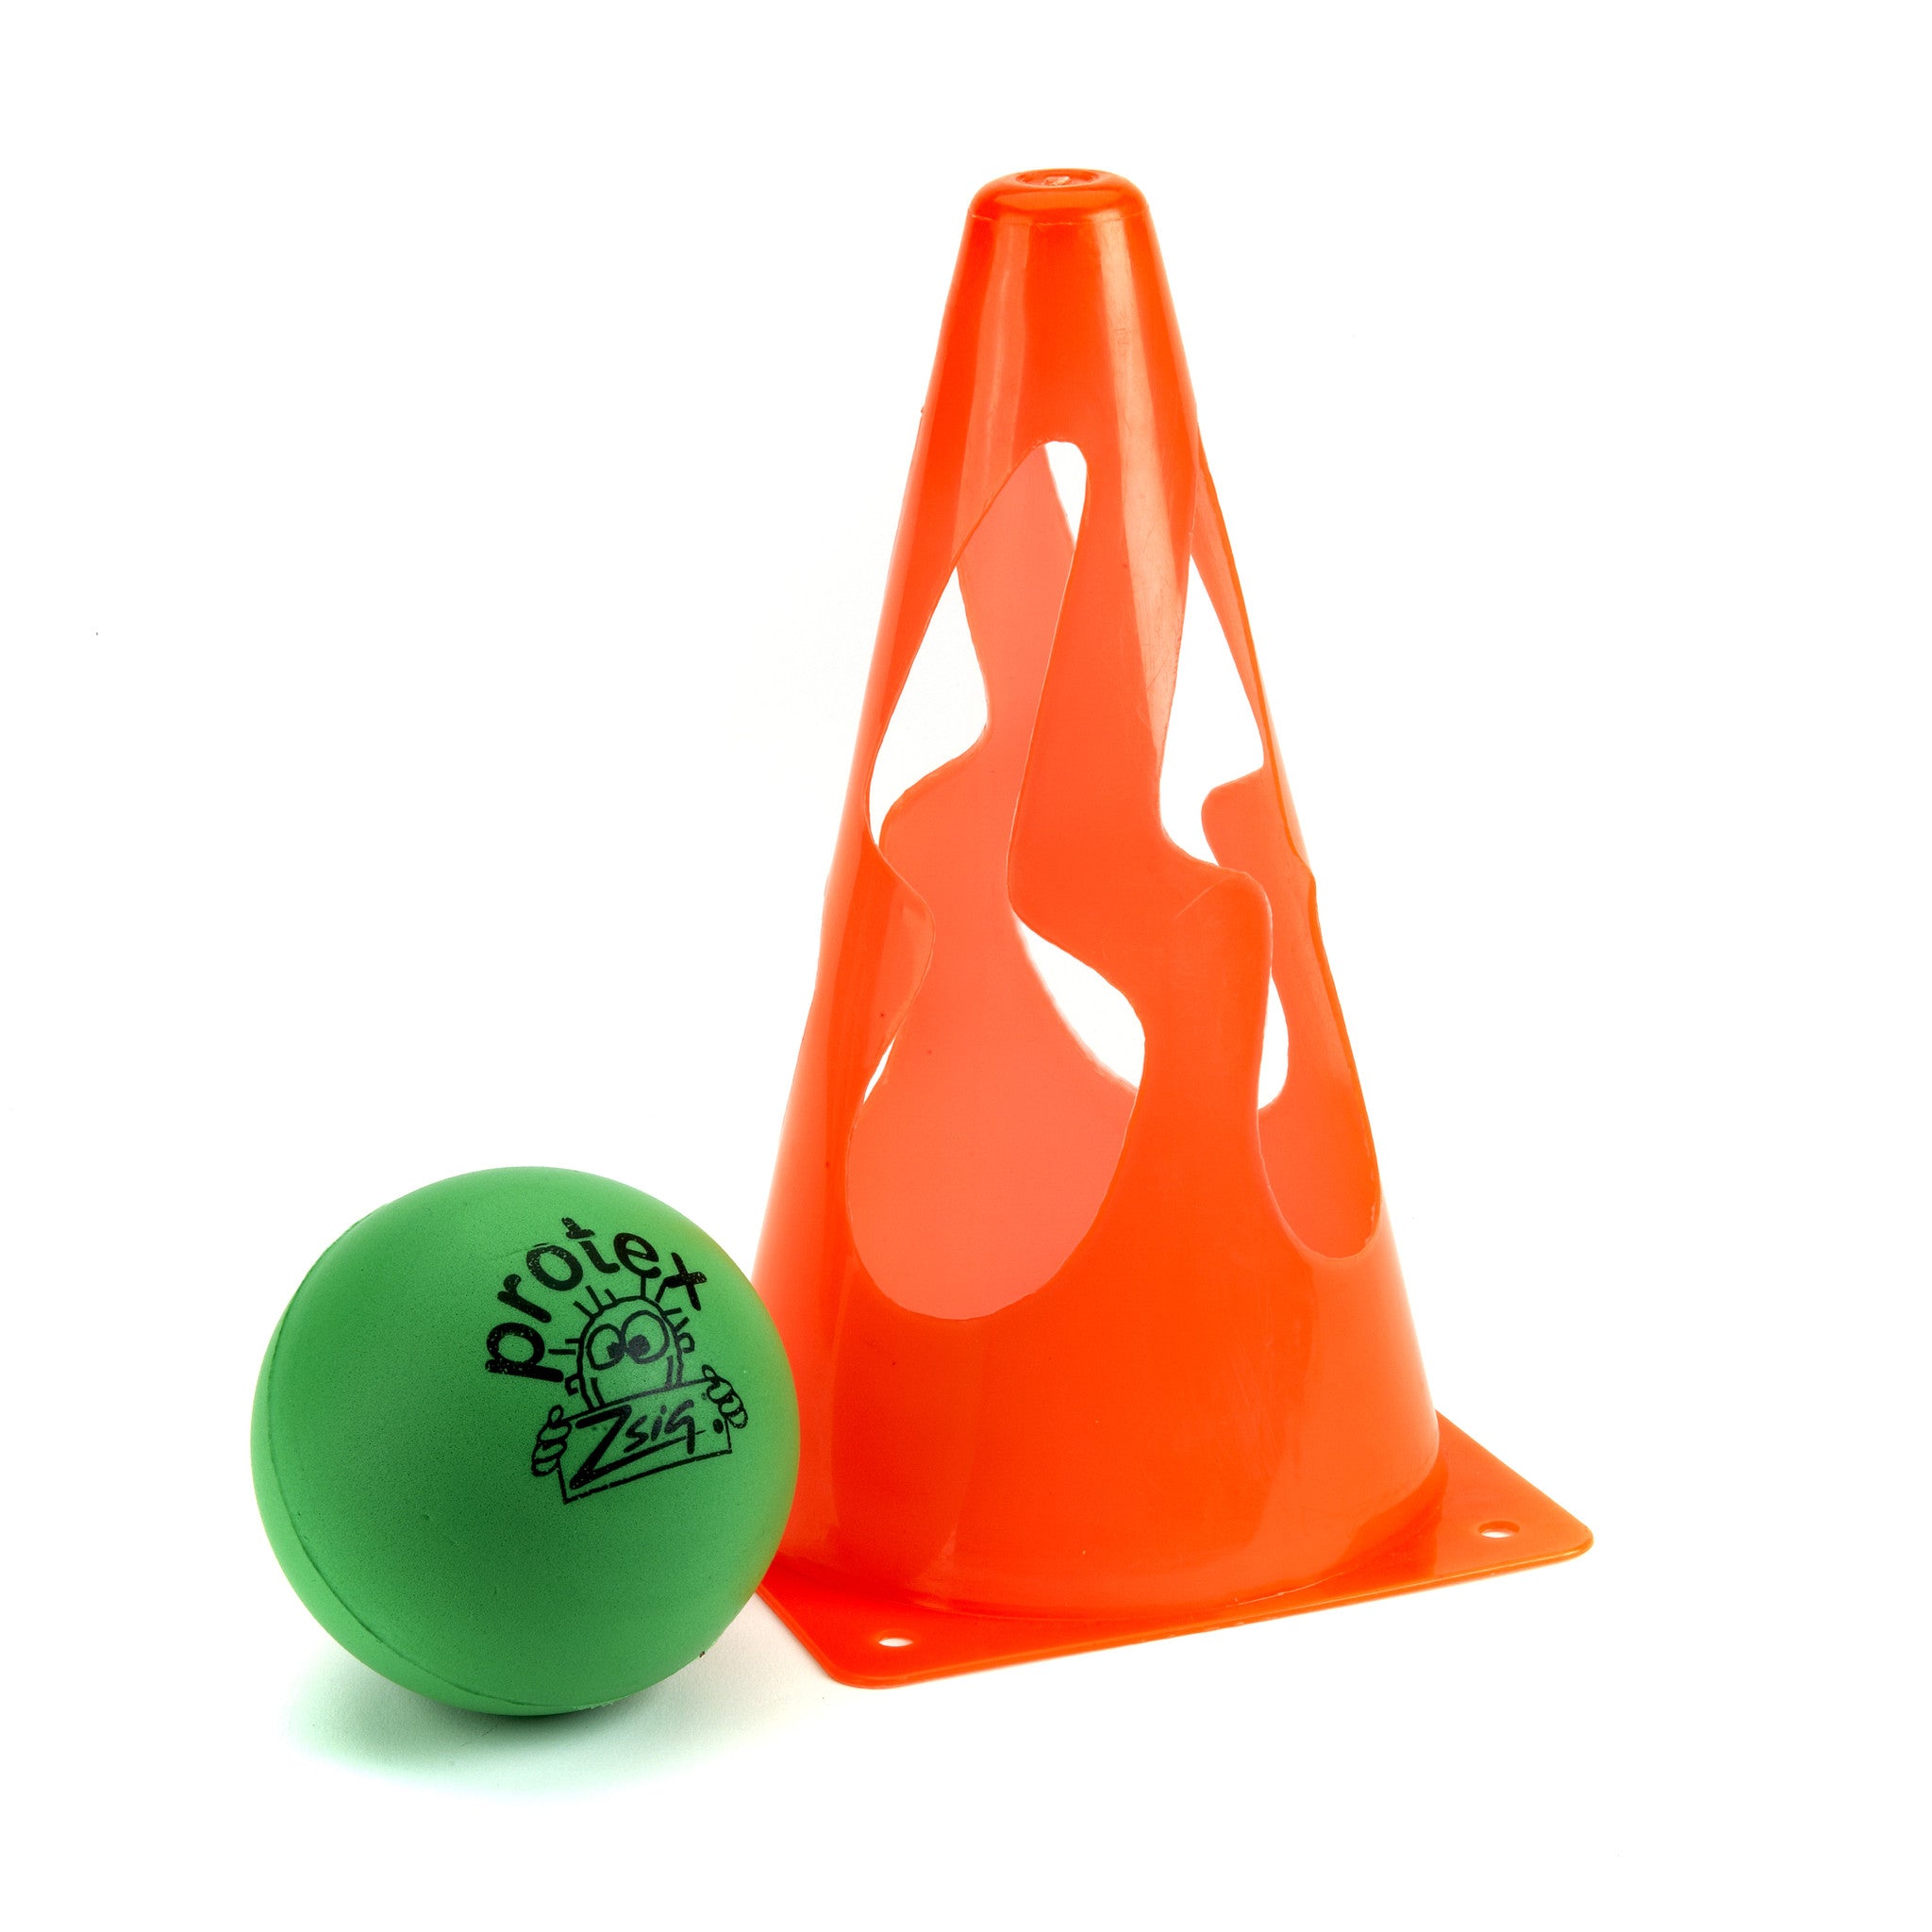 Collapsible sports marker cone for coaching & training. Bright orange single cone.